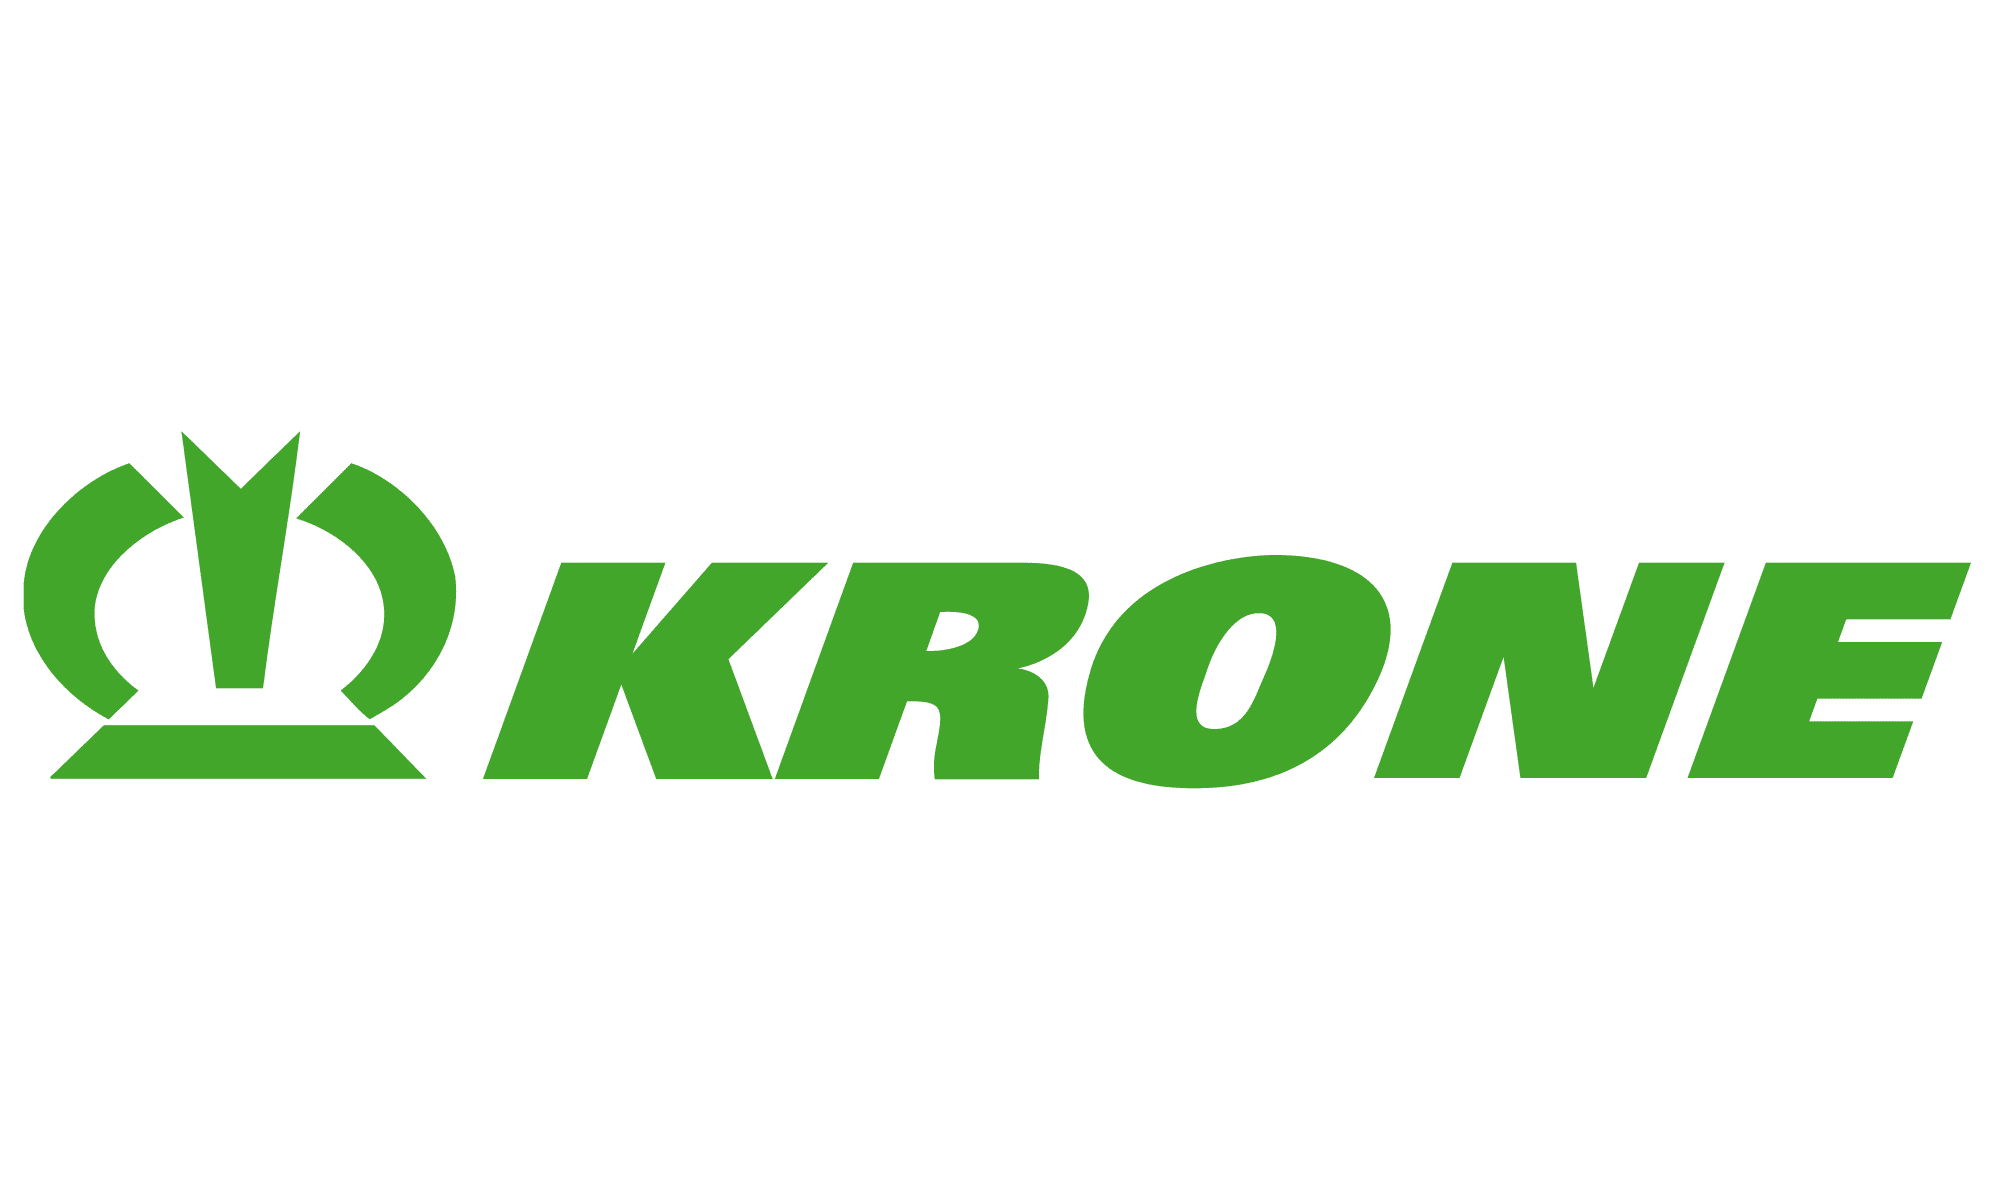 Krone logo marques selected